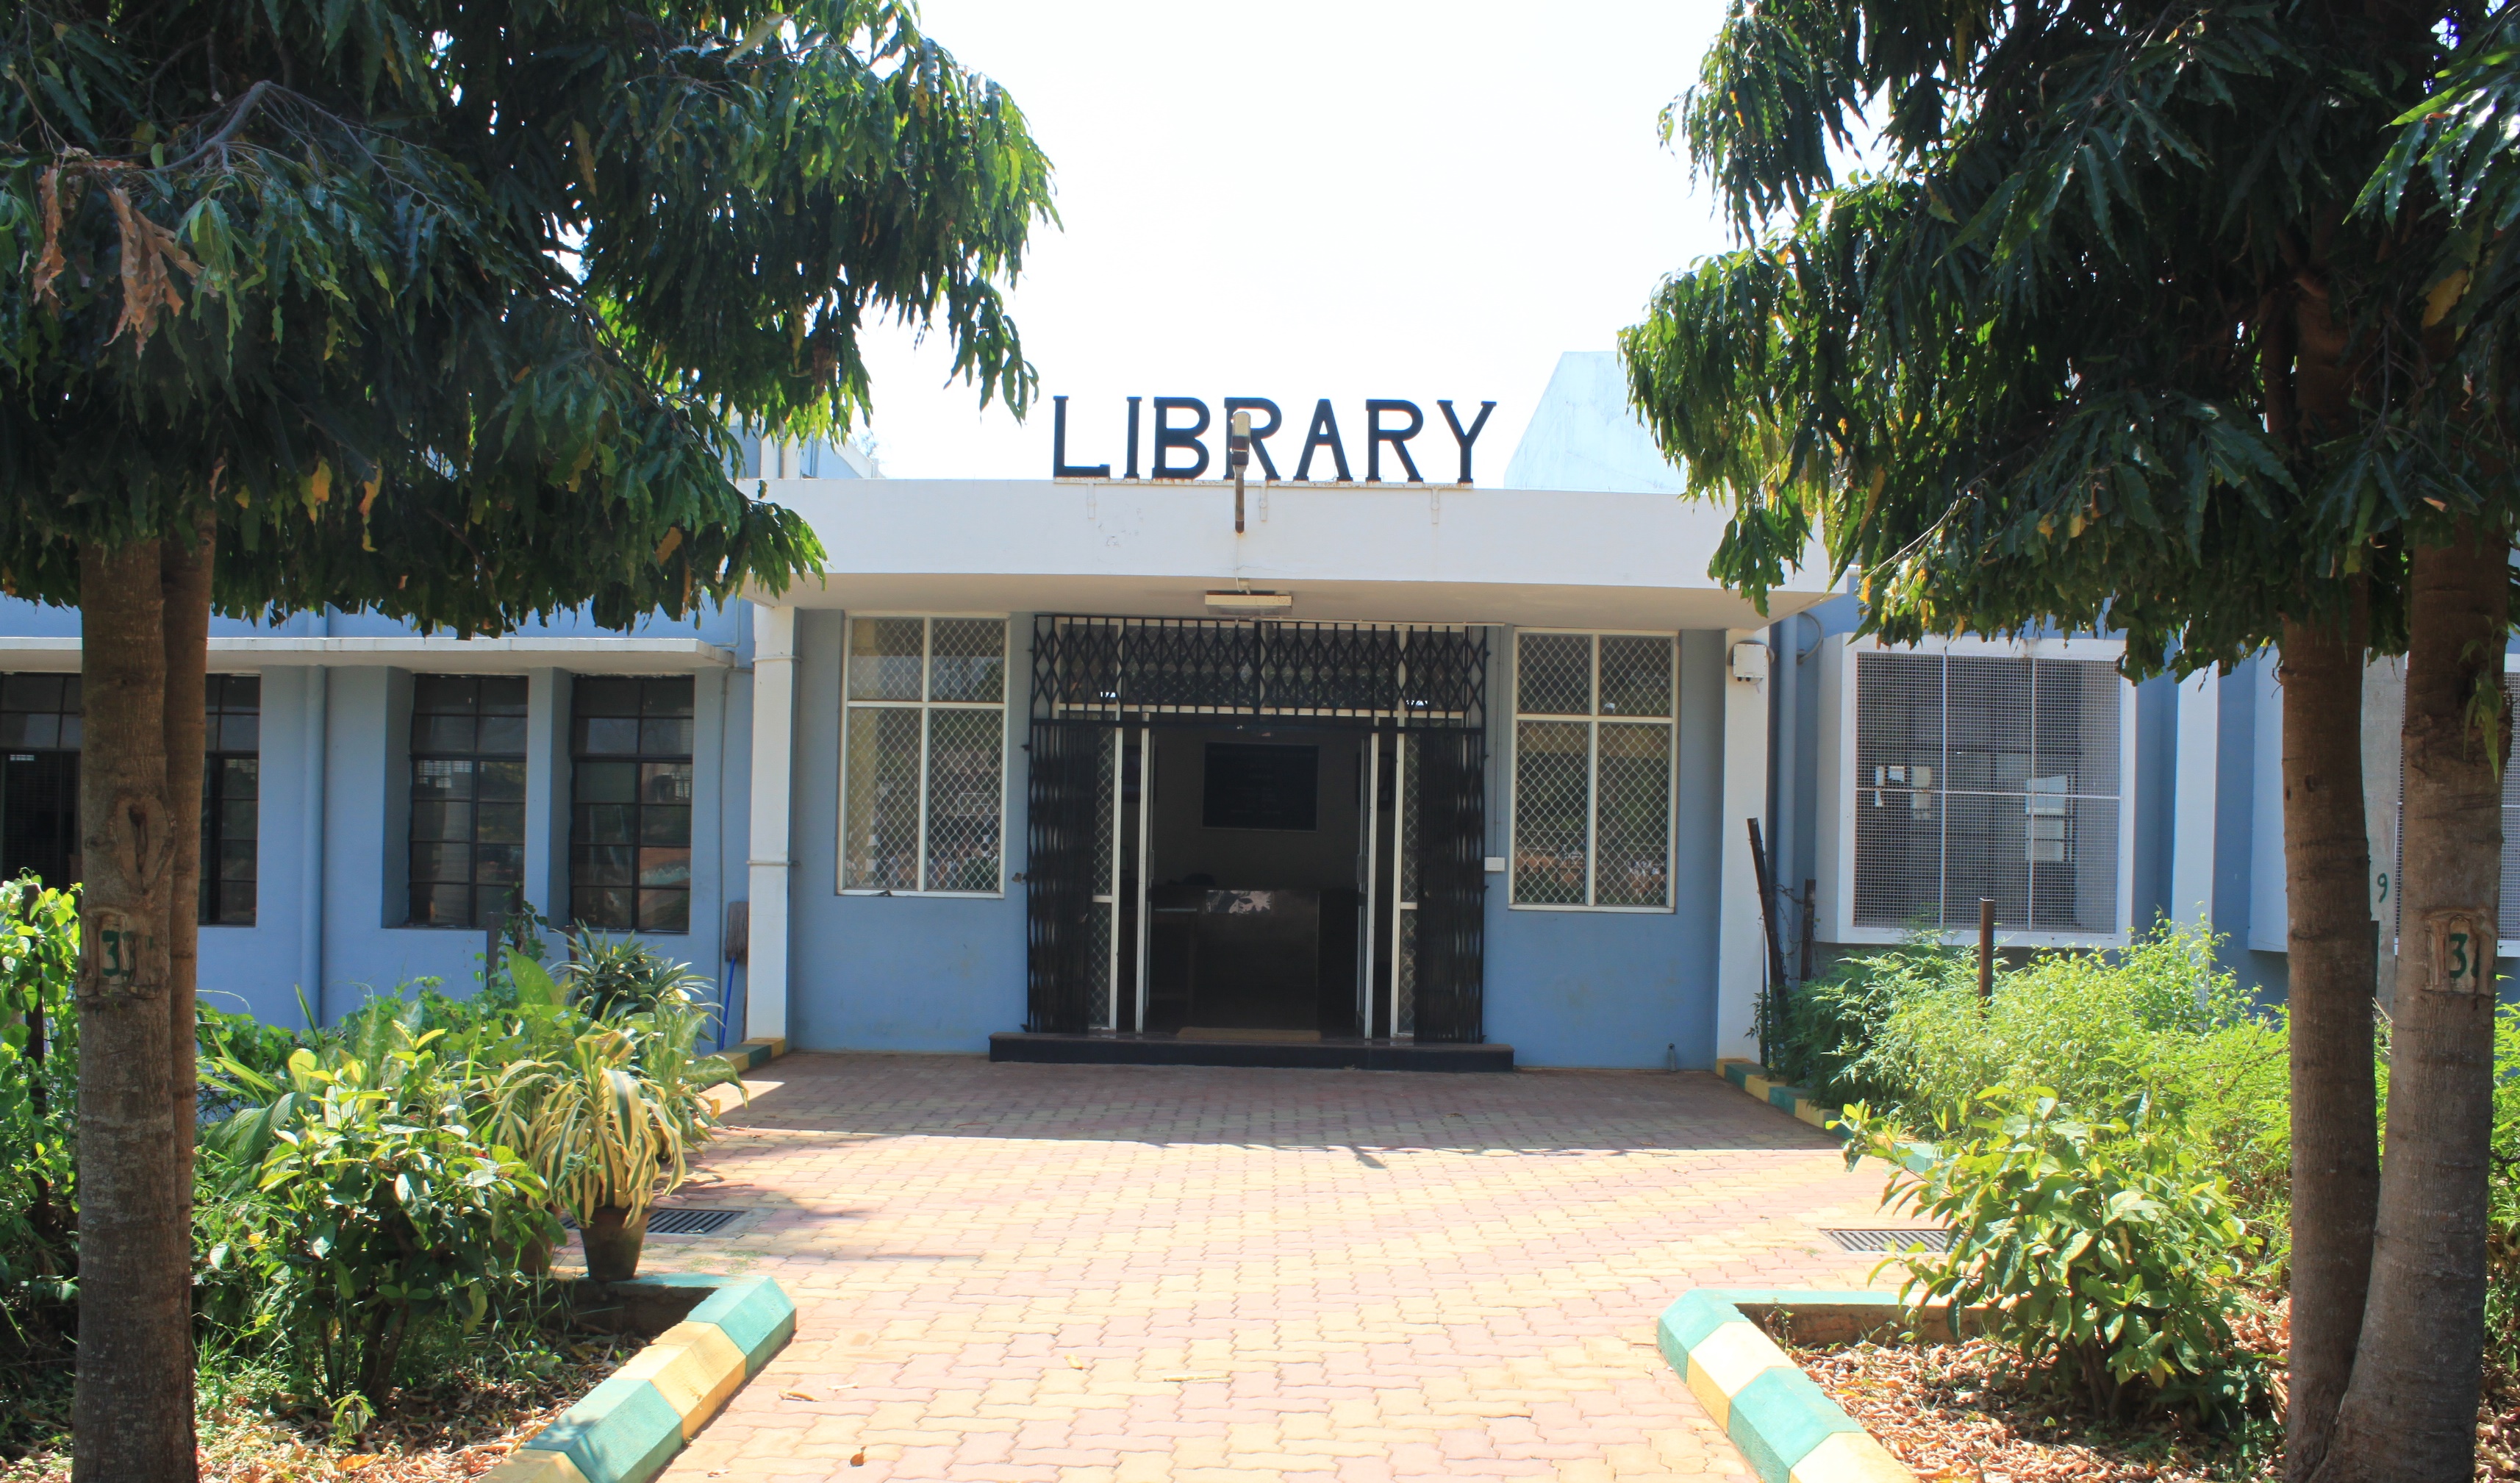 LIbrary Entrance